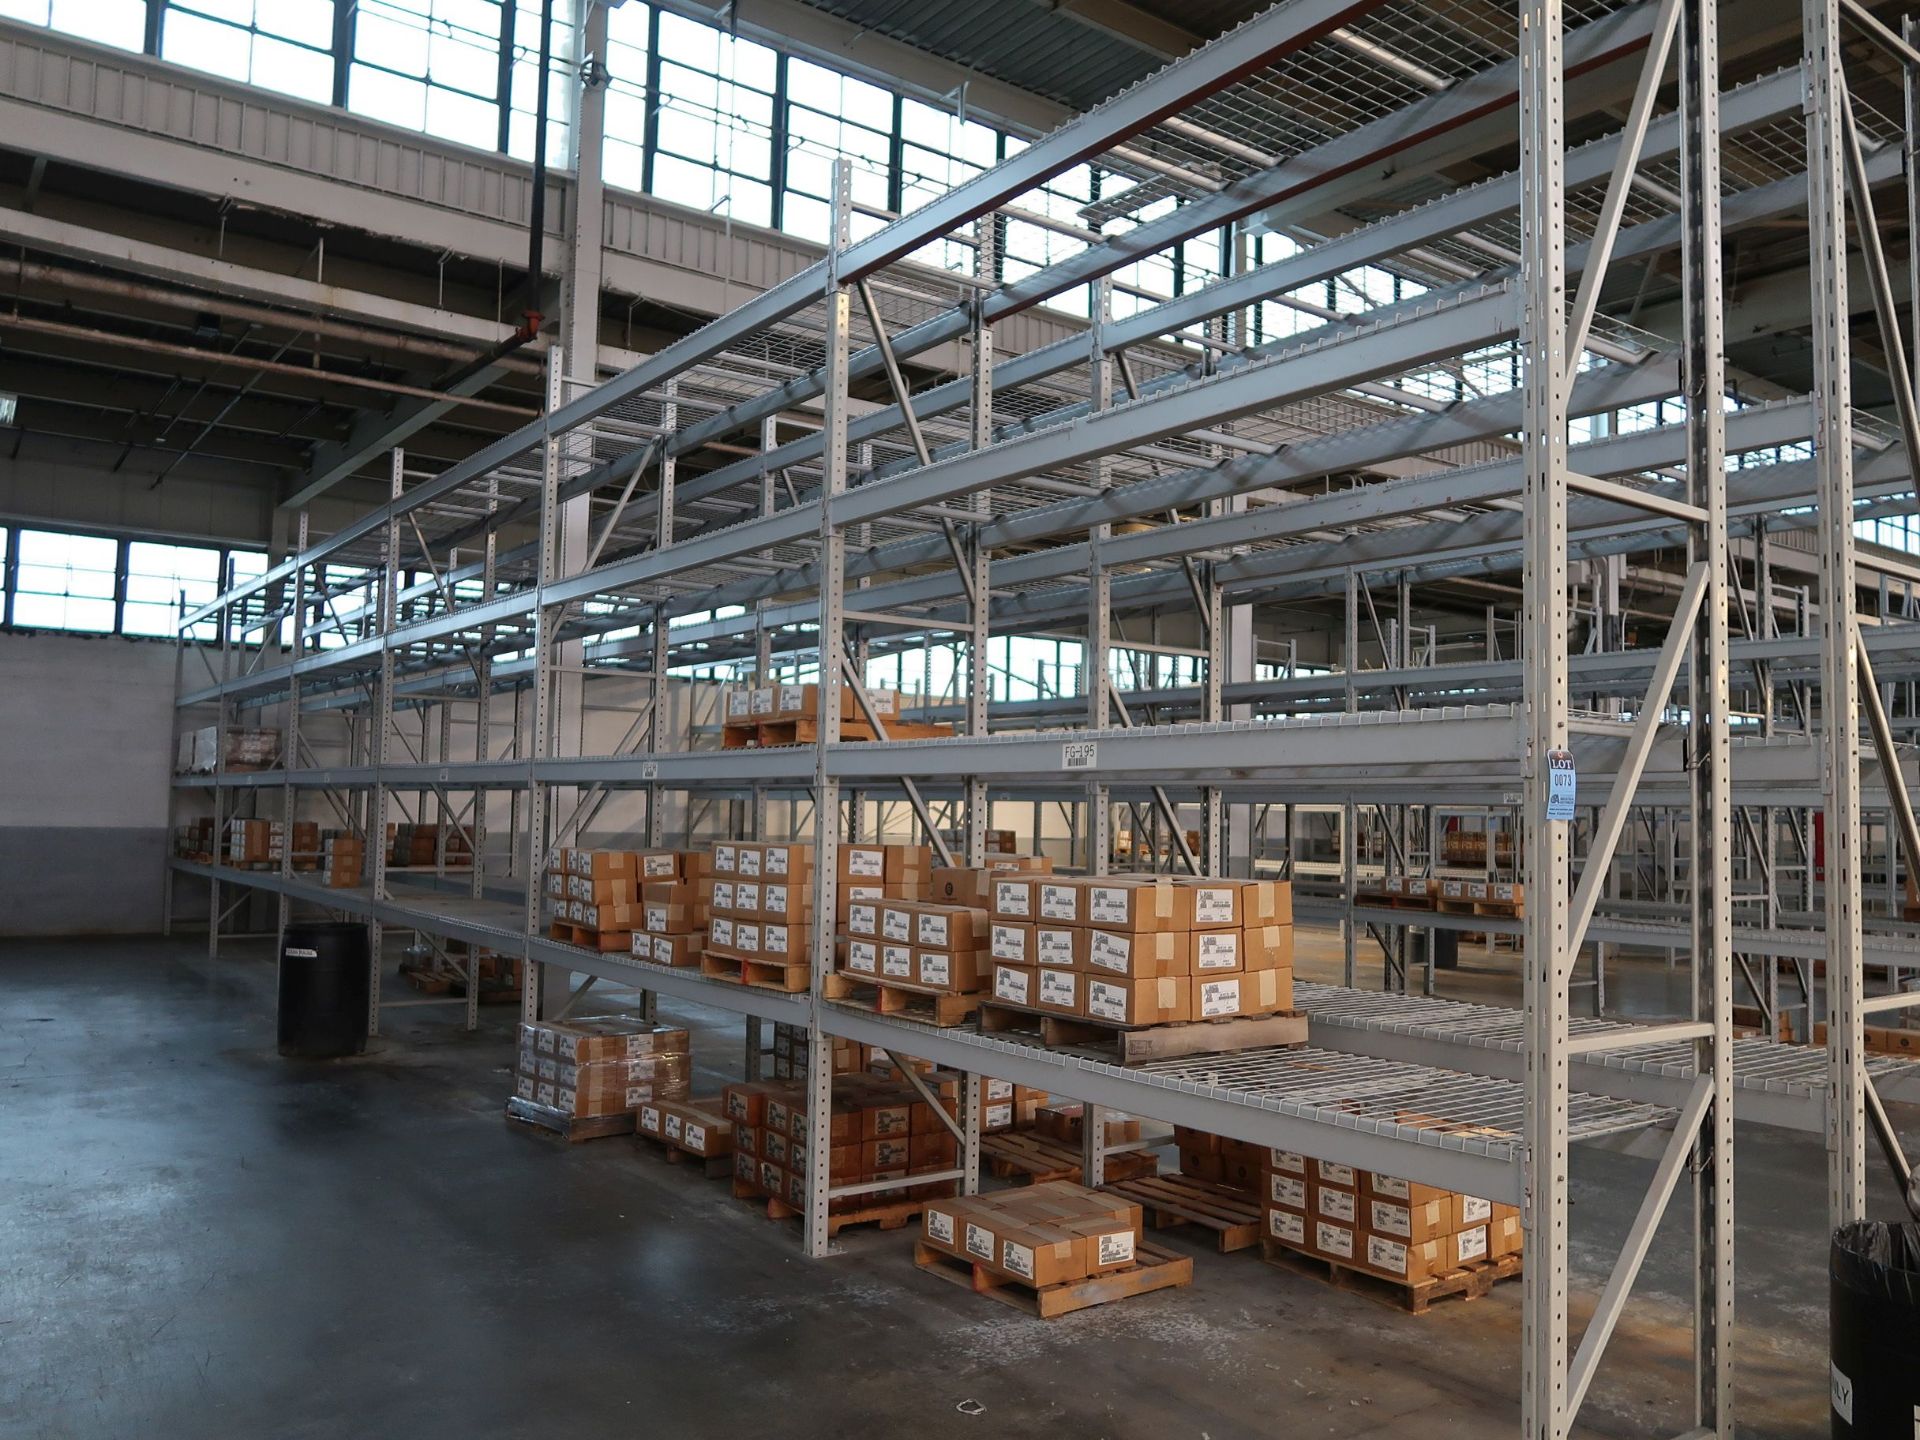 SECTIONS 32" X 124" X 180" NOTCH TYPE ADJUSTABLE BEAM PALLET RACKS WITH (7) 32" X 180" UPRIGHTS, (